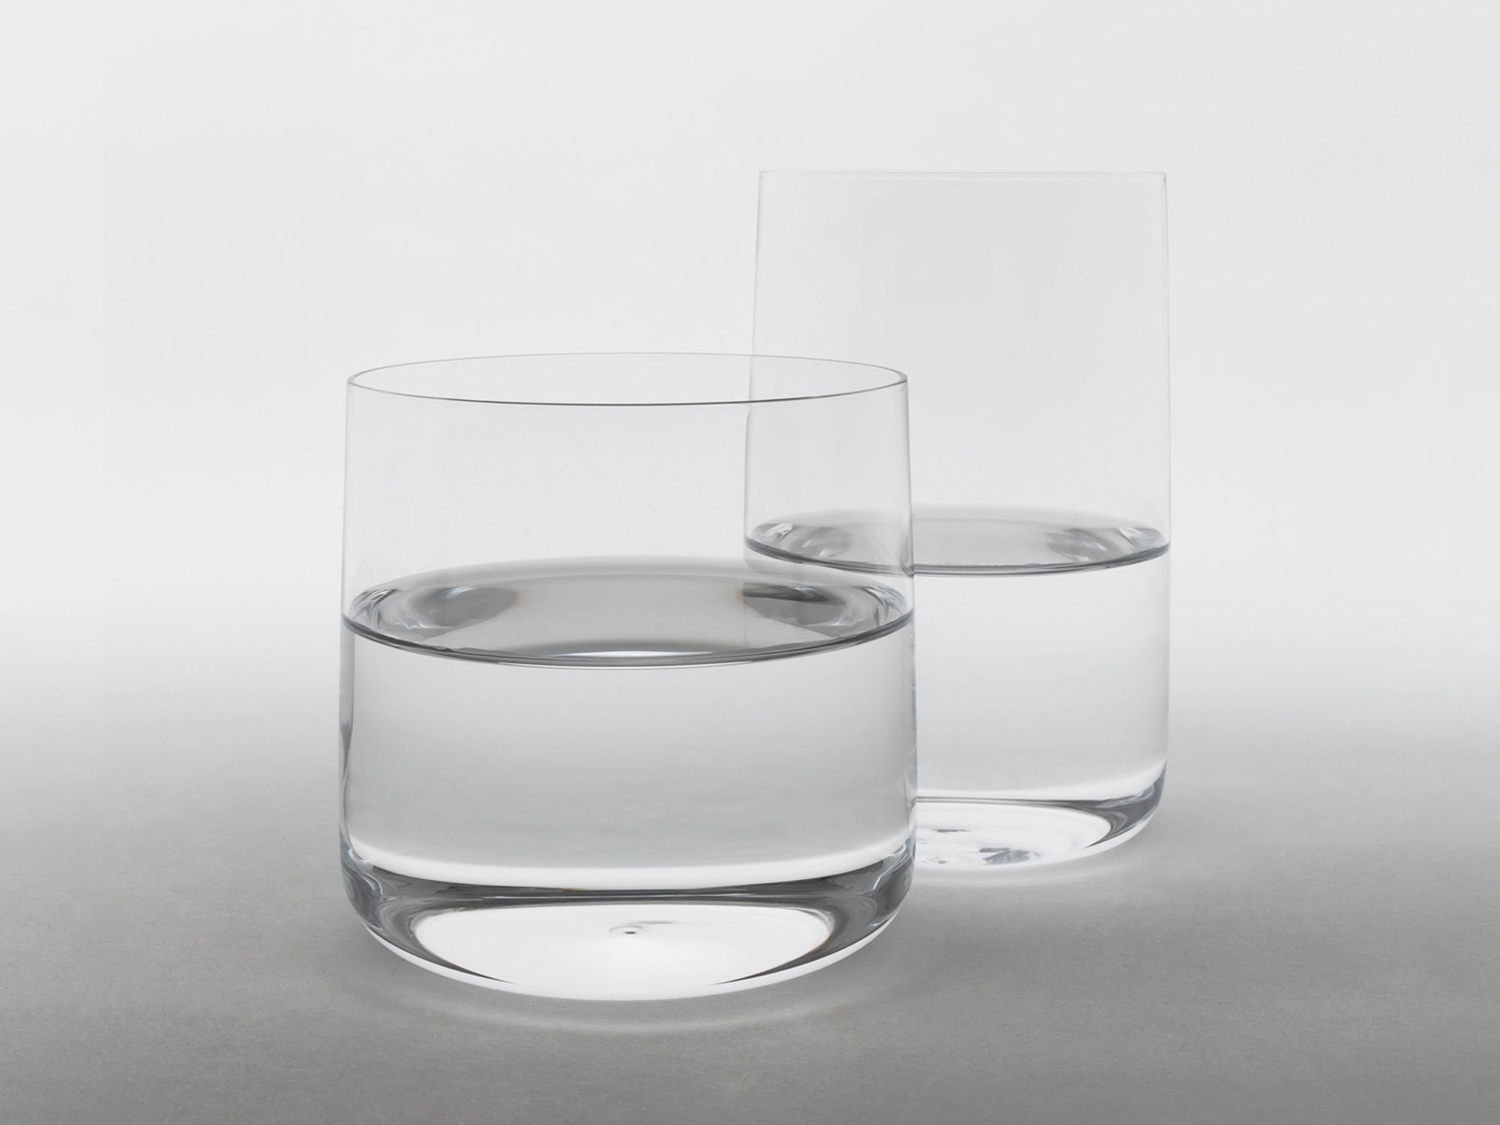 Ando's Glasses (2014). Simple handblown drinking glasses produced by Ando Gallery, Japan. Photo: Ando Gallery.